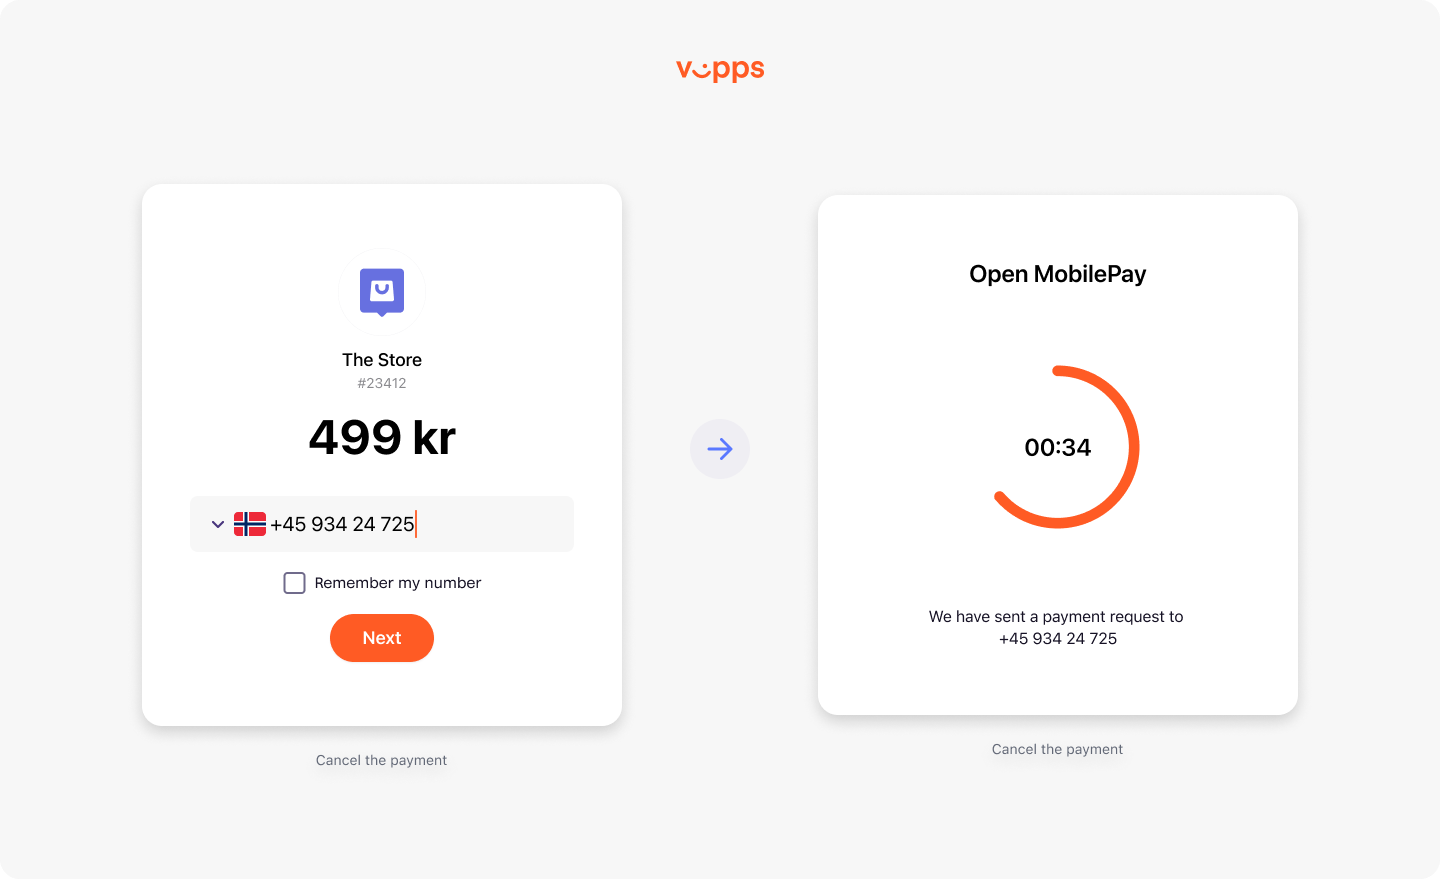 Vipps landing page